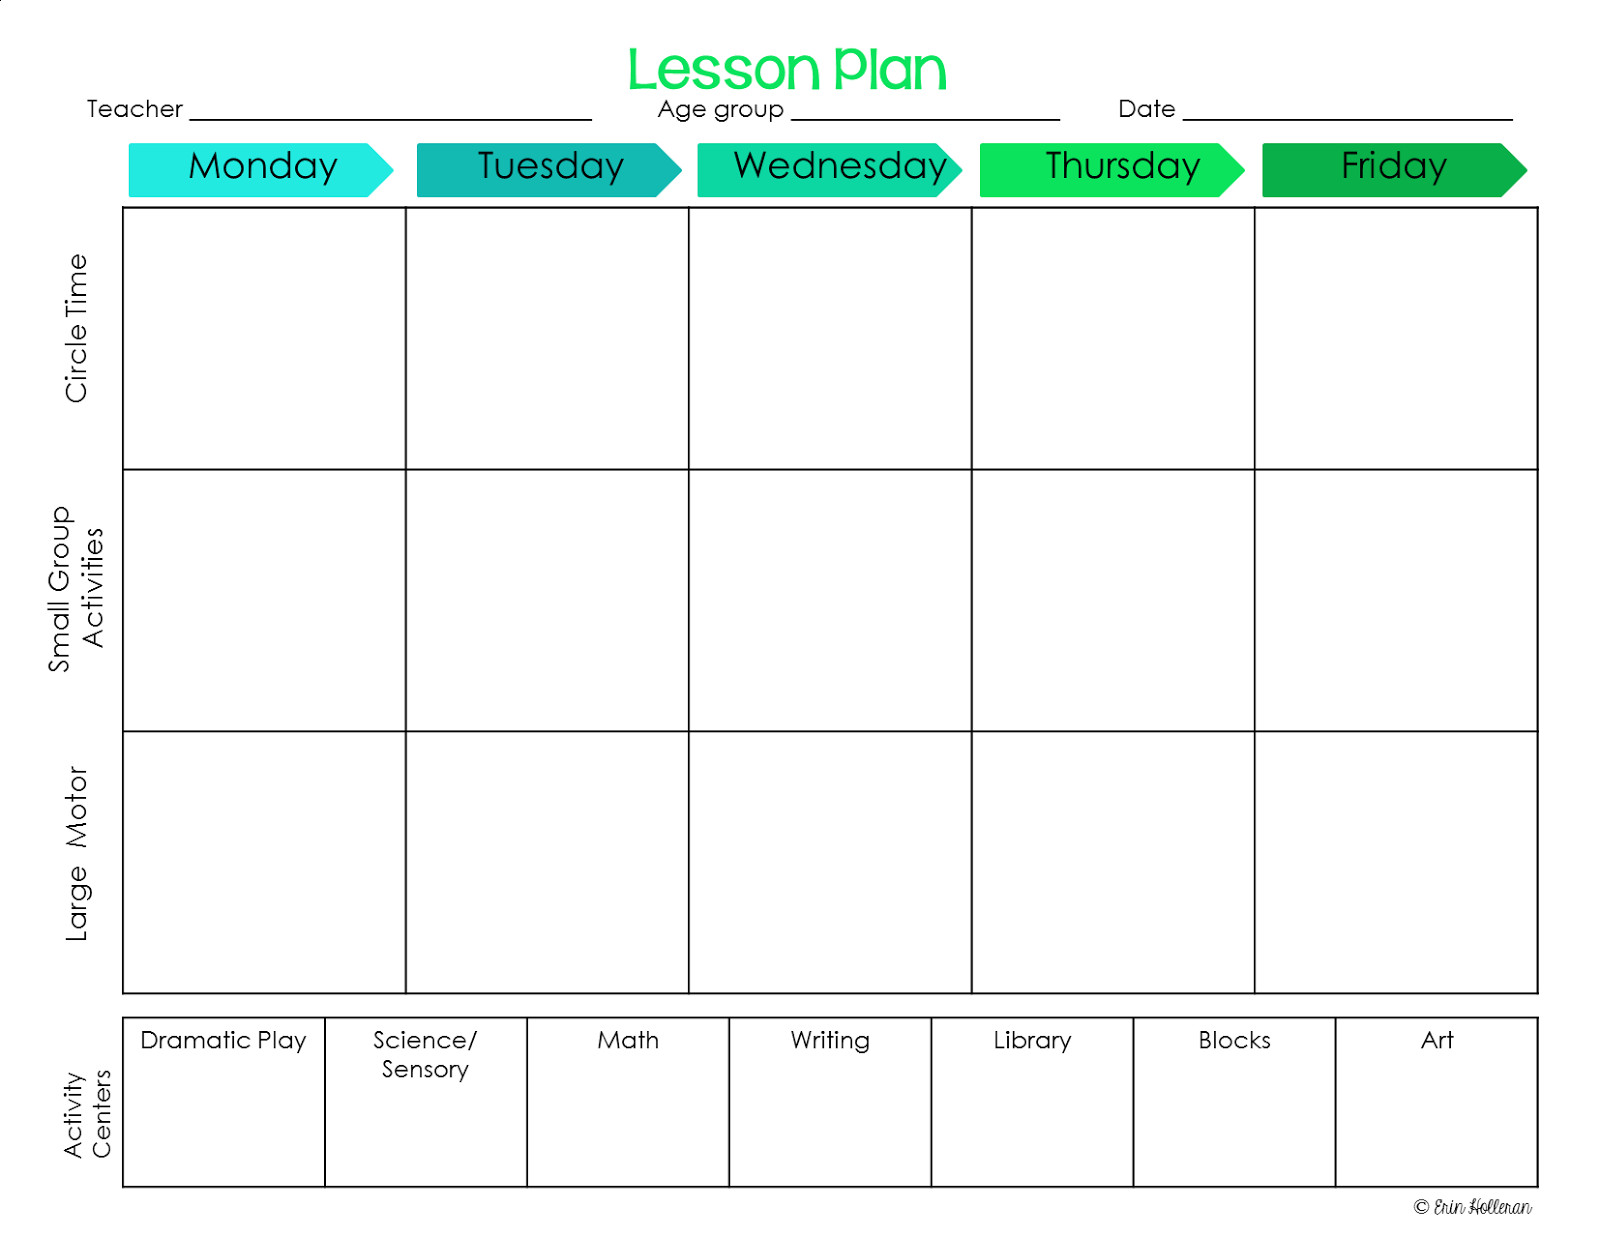 Free Printable Lesson Plans Make Your Lesson Plans Work for You